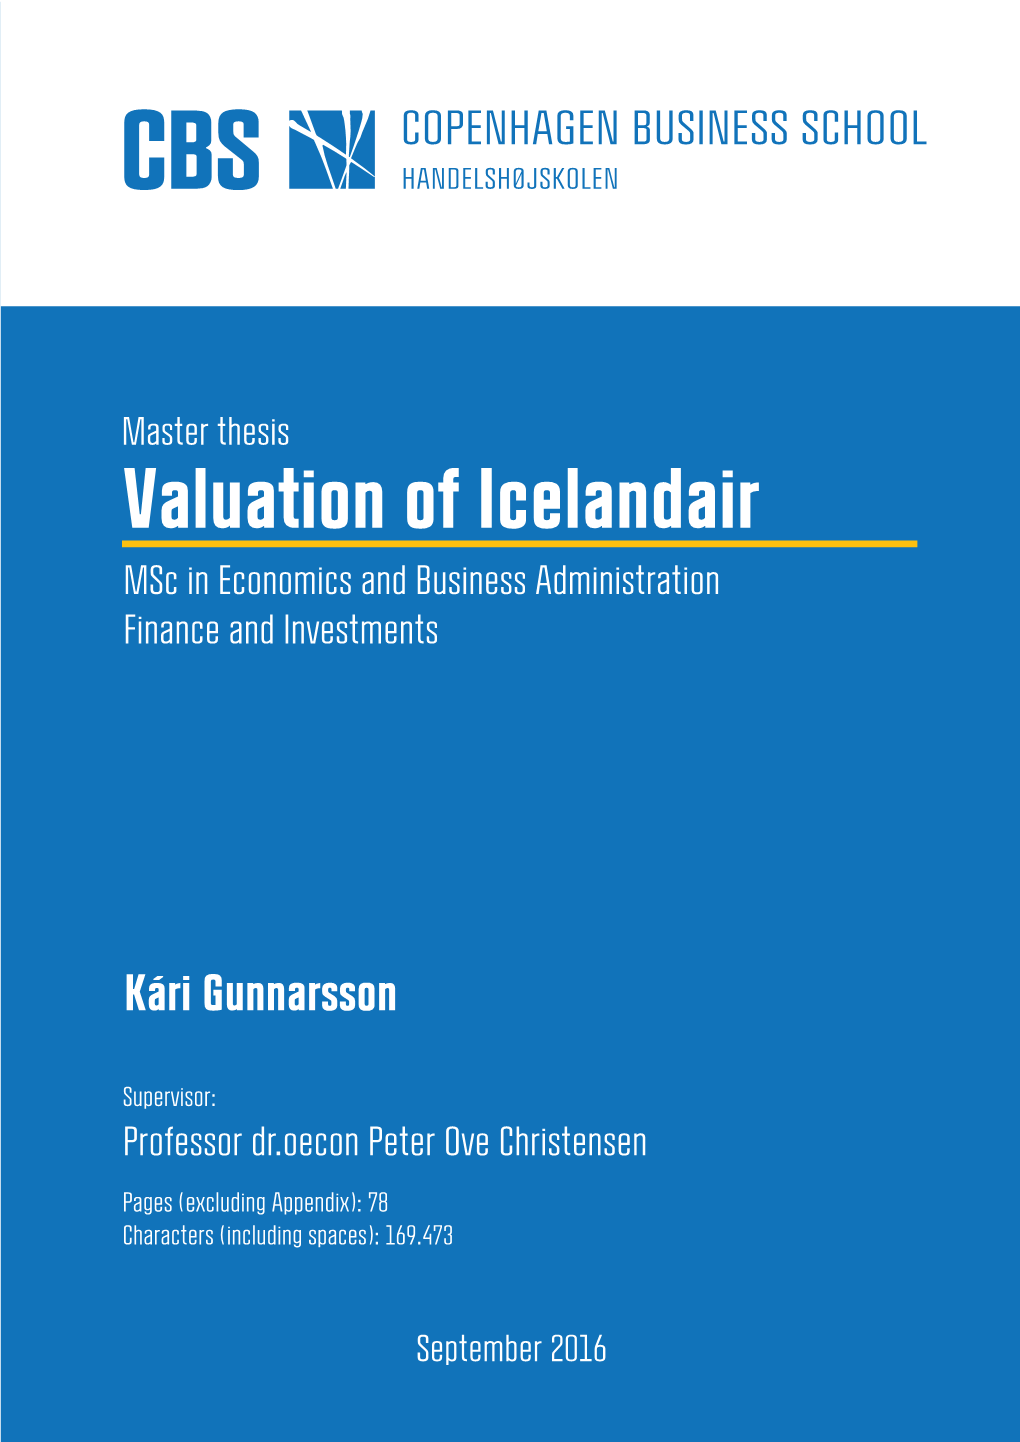 Masters Thesis: Valuation of Icelandair